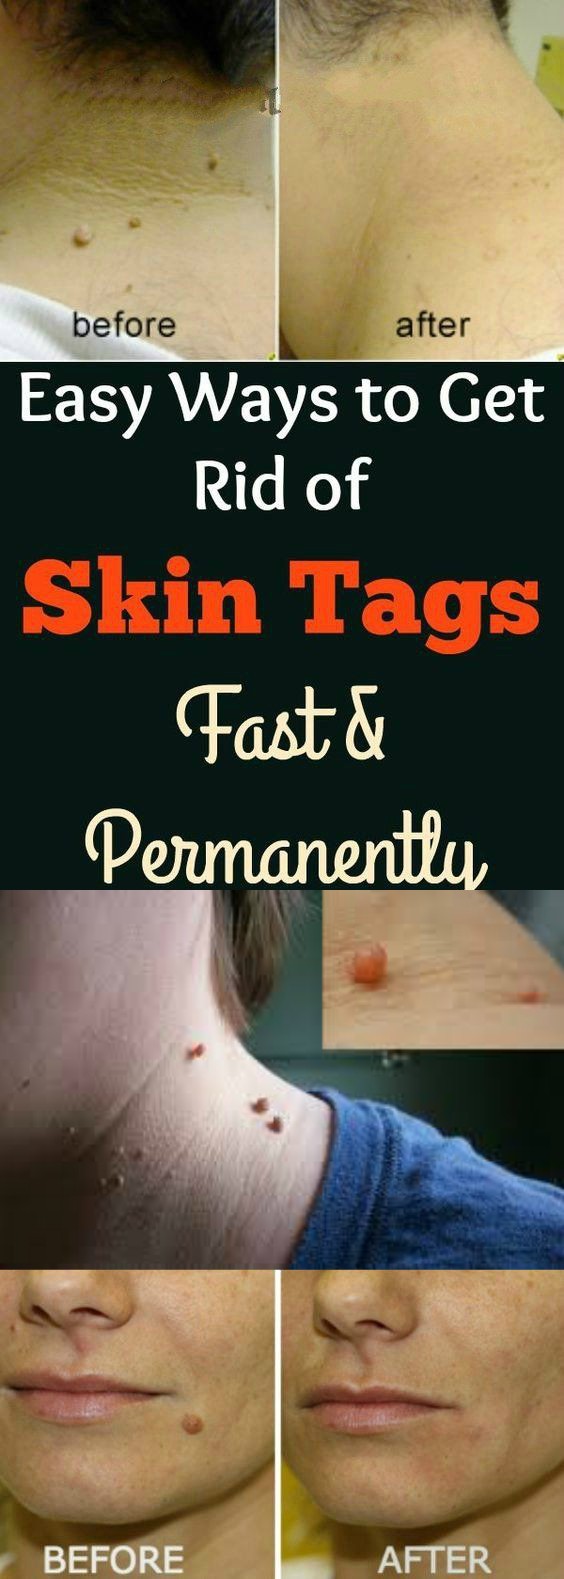 How to Remove Skin Tags Fast: 8 Home Remedies That Really Work